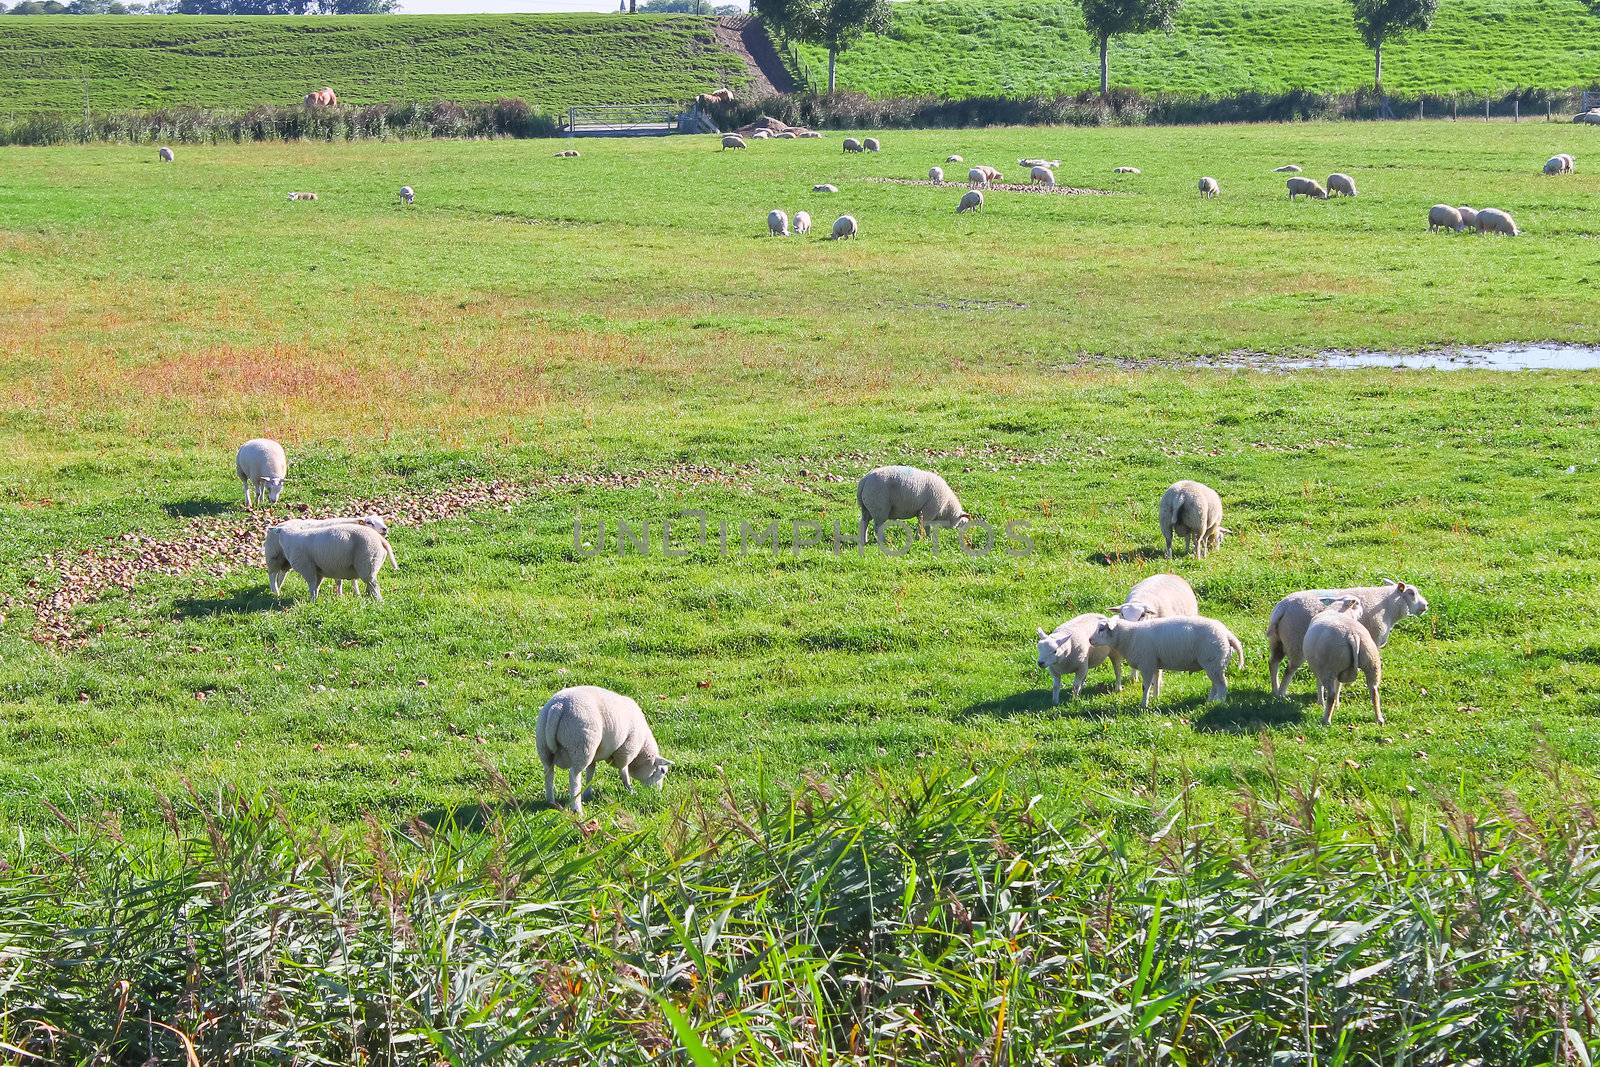 Sheep on summer pasture. Netherlands by NickNick